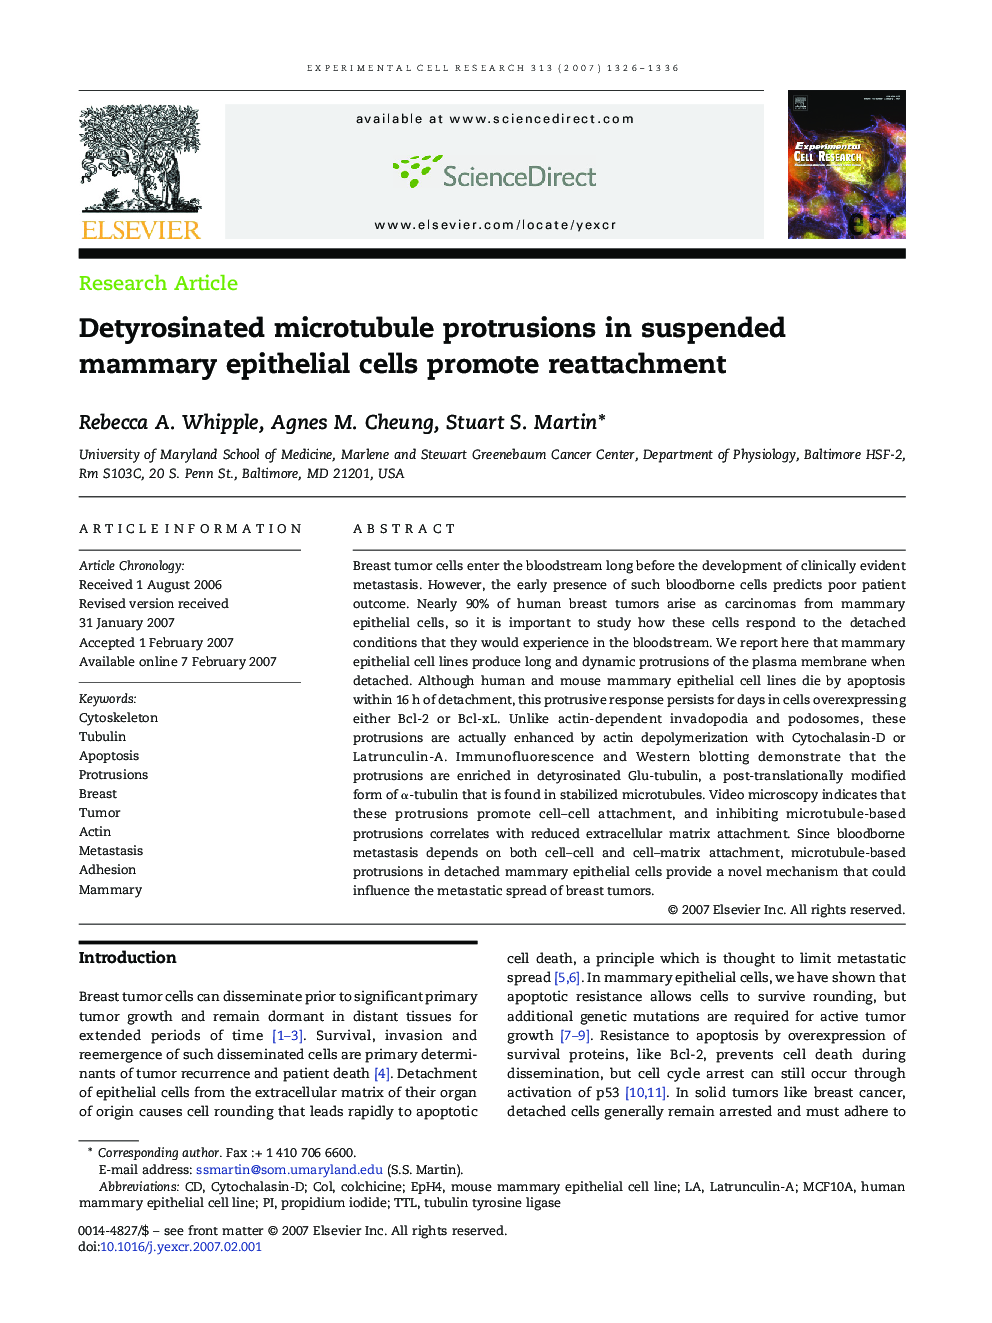 Detyrosinated microtubule protrusions in suspended mammary epithelial cells promote reattachment